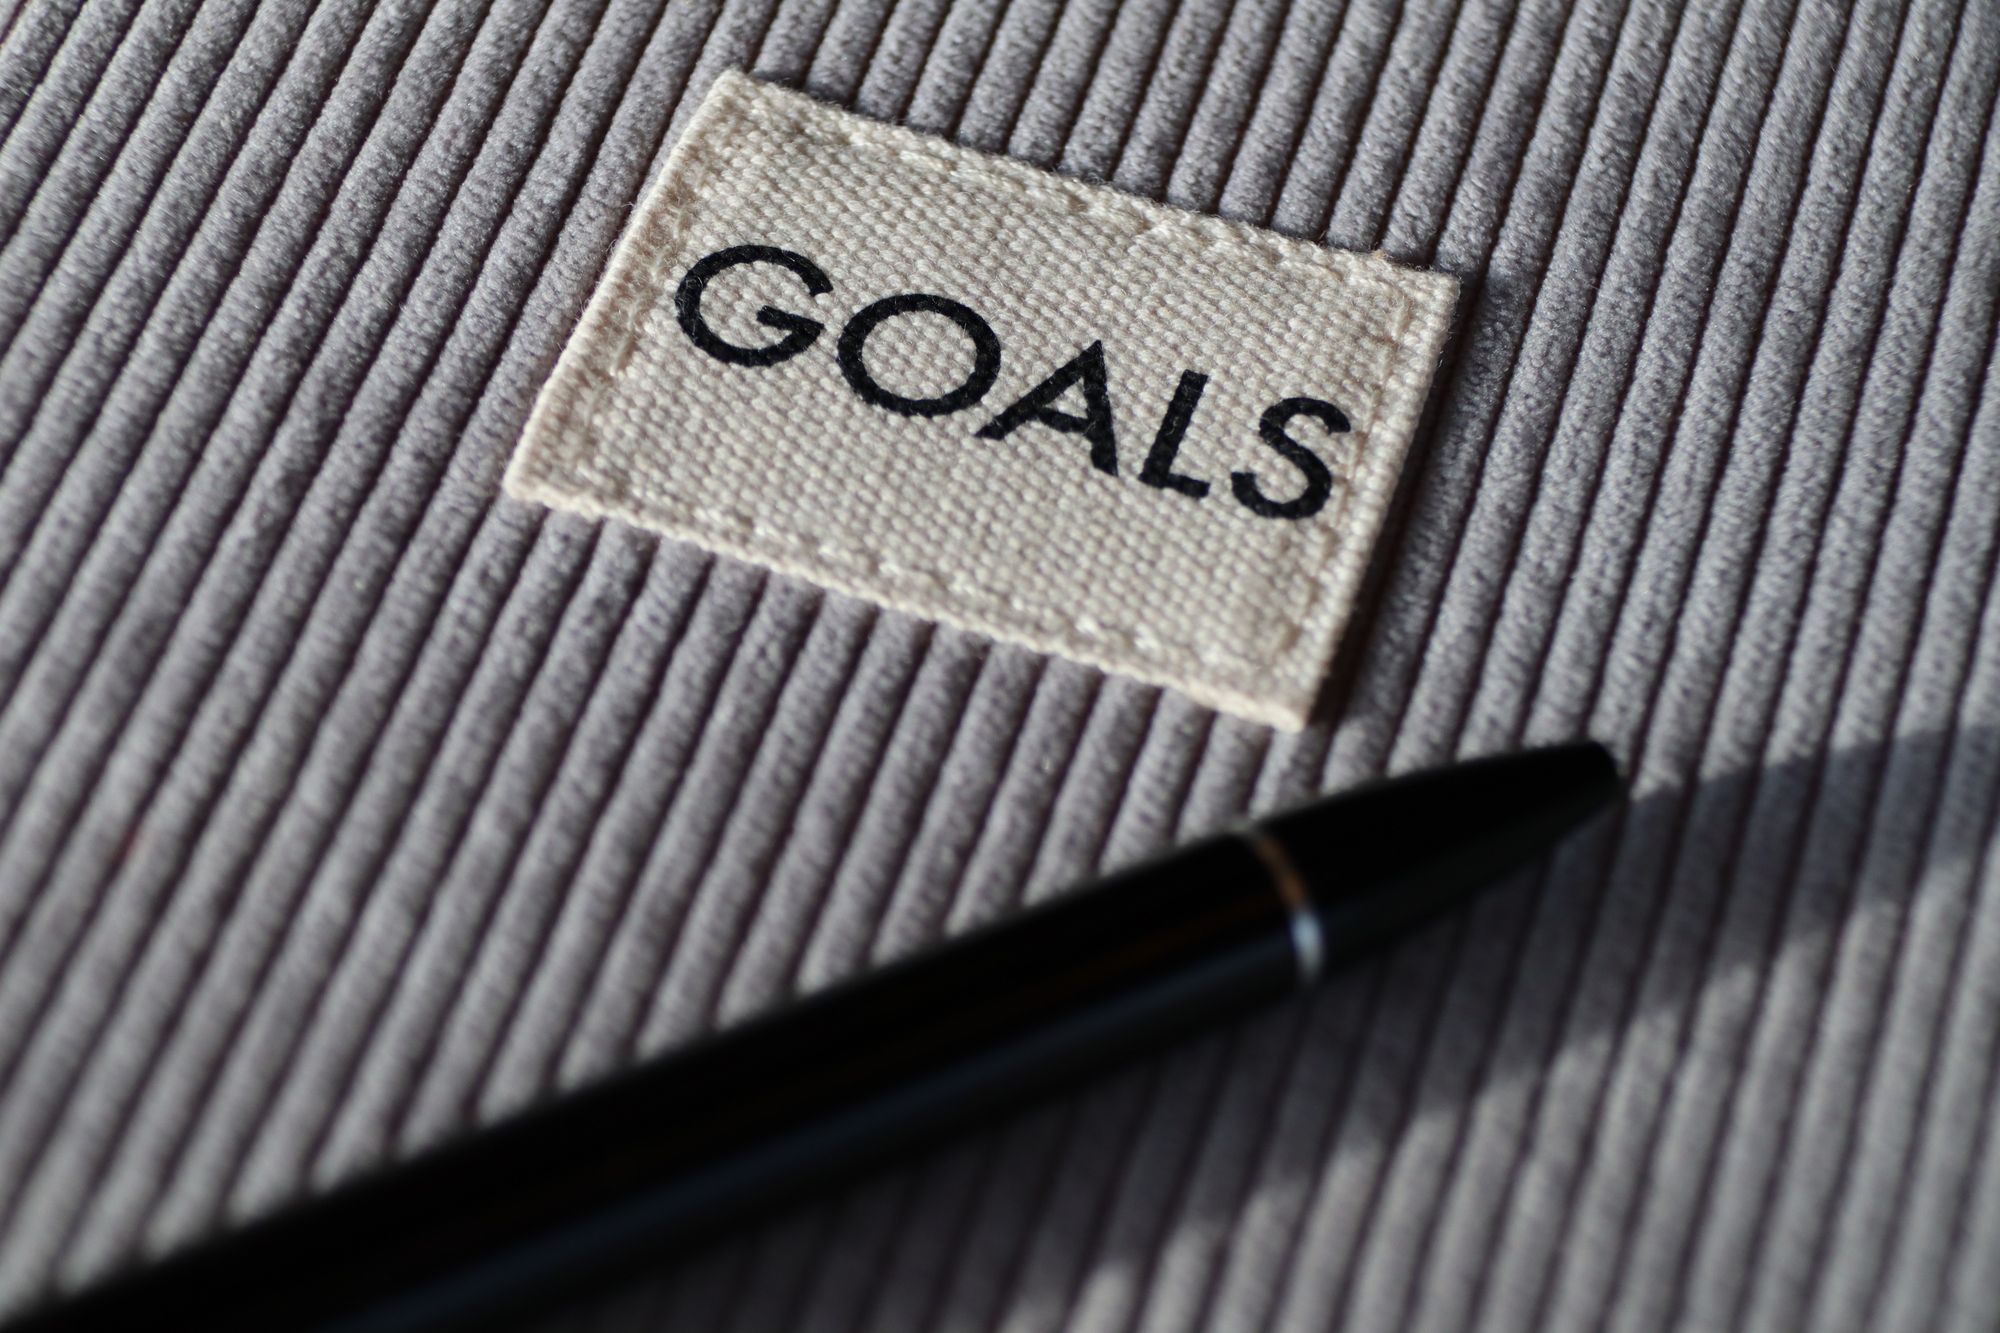 Image of a pen and an engraved lettering of "GOALS"